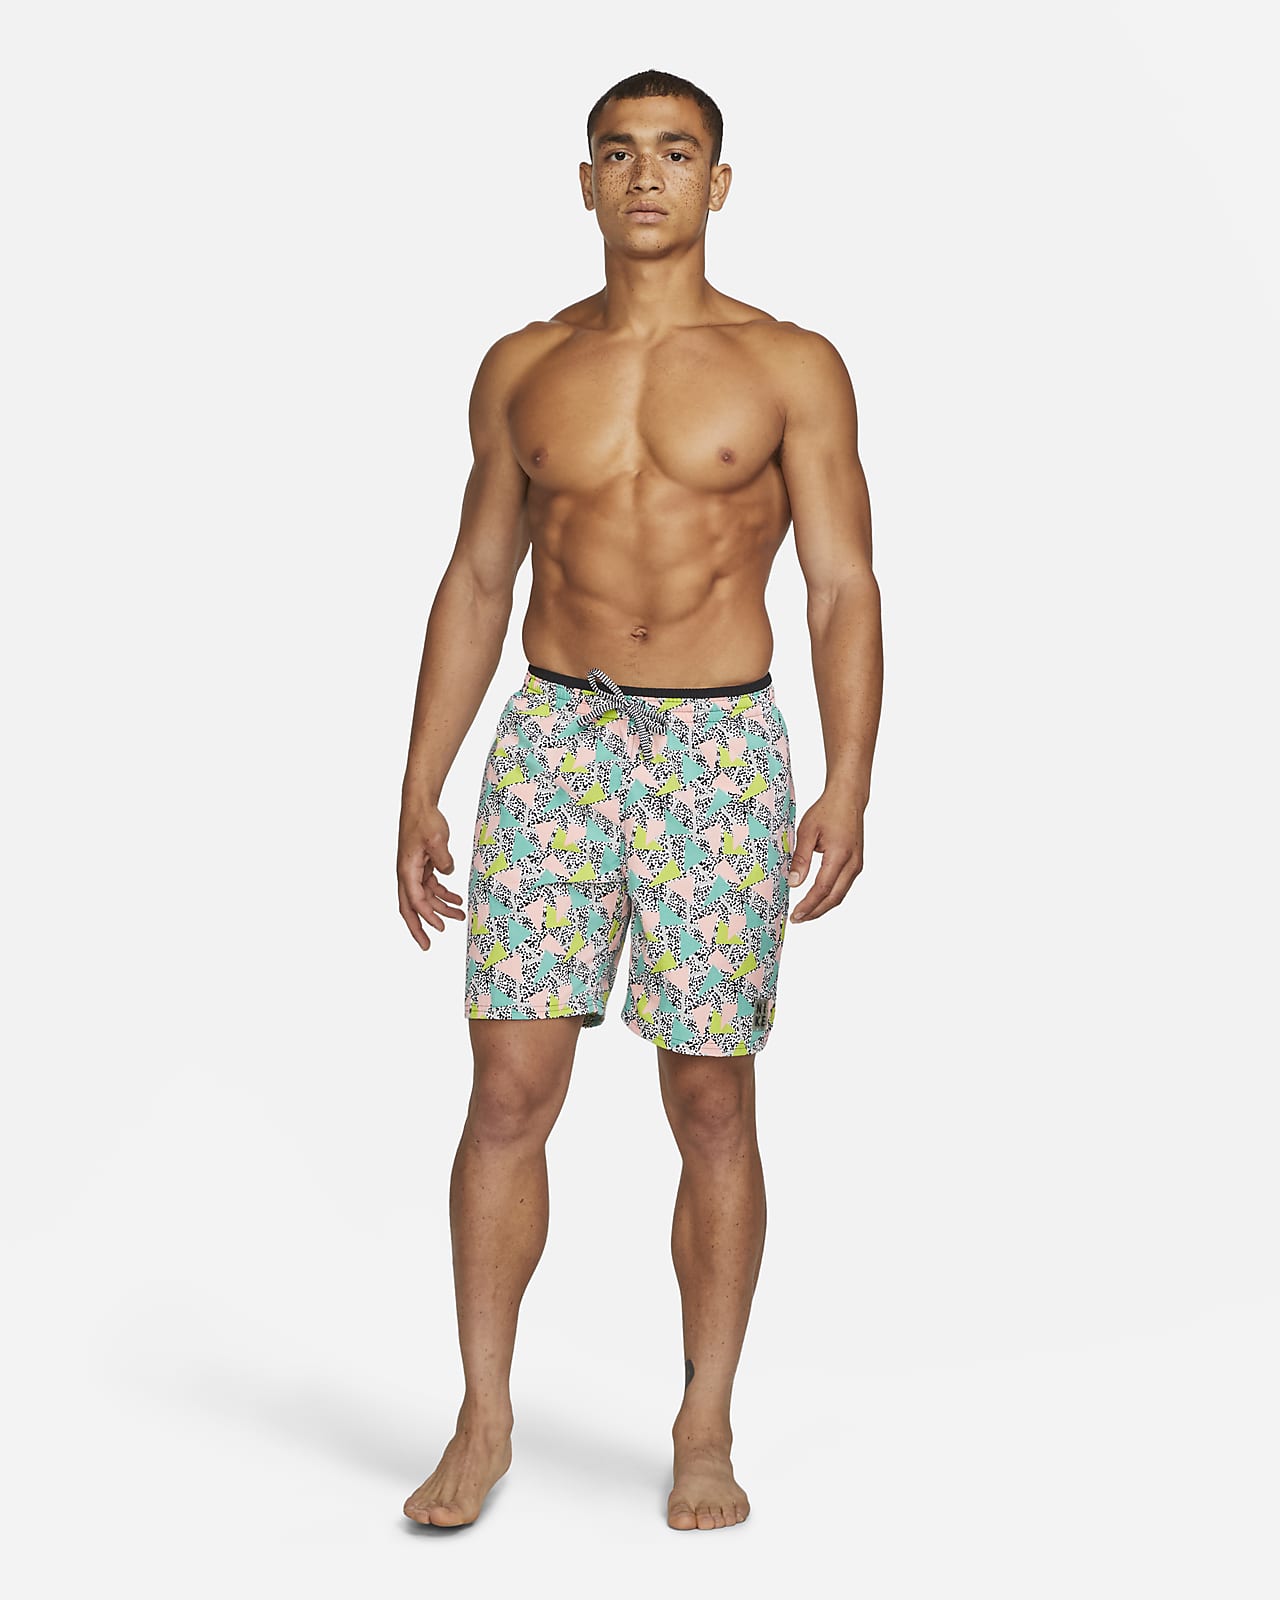 Nike Vibe Men's Icon 7 Volley Short.